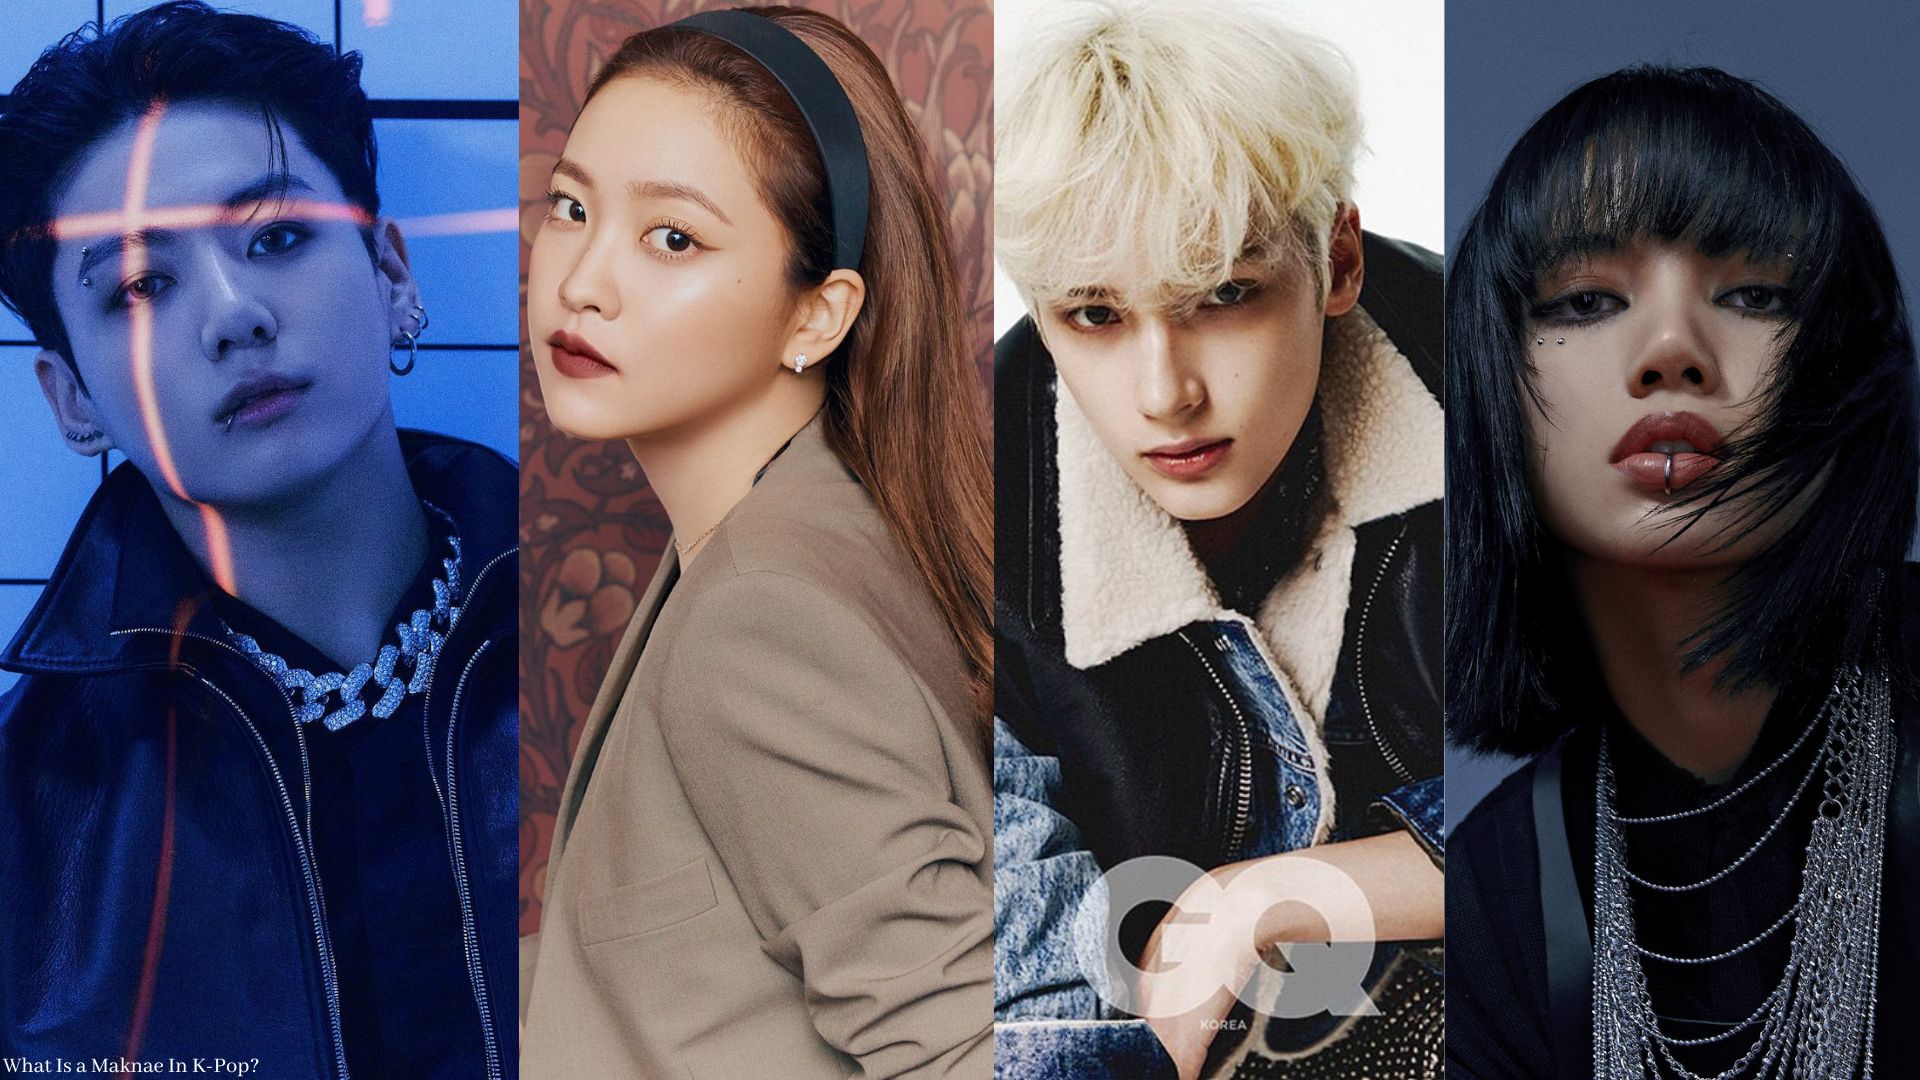 What Is a ‘Maknae’ In K-Pop? The Top 4 Most Popular Maknaes